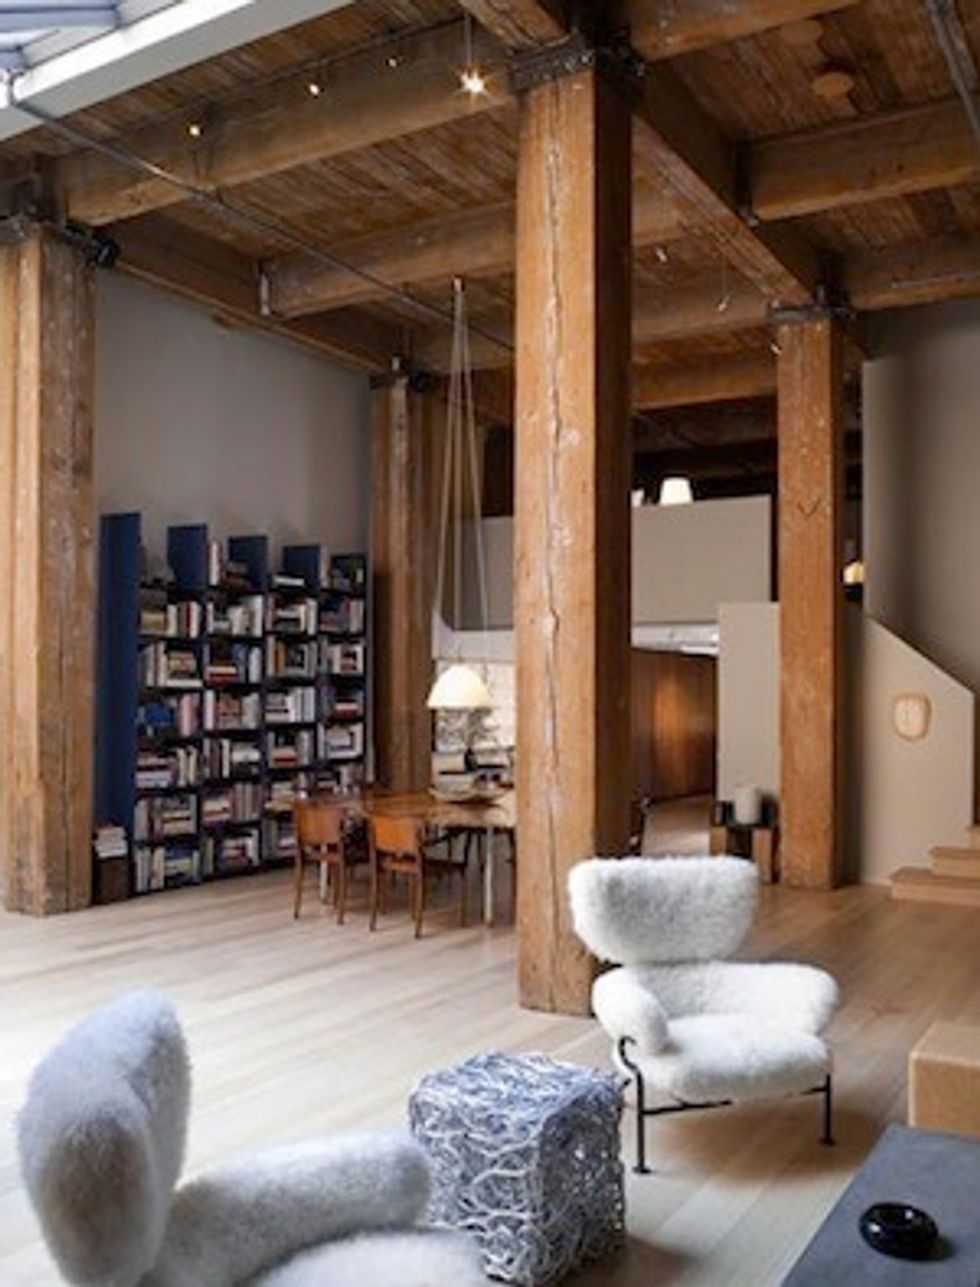 Real Estate Report: Sublimely Simple Loft in SoMa, $1.55M